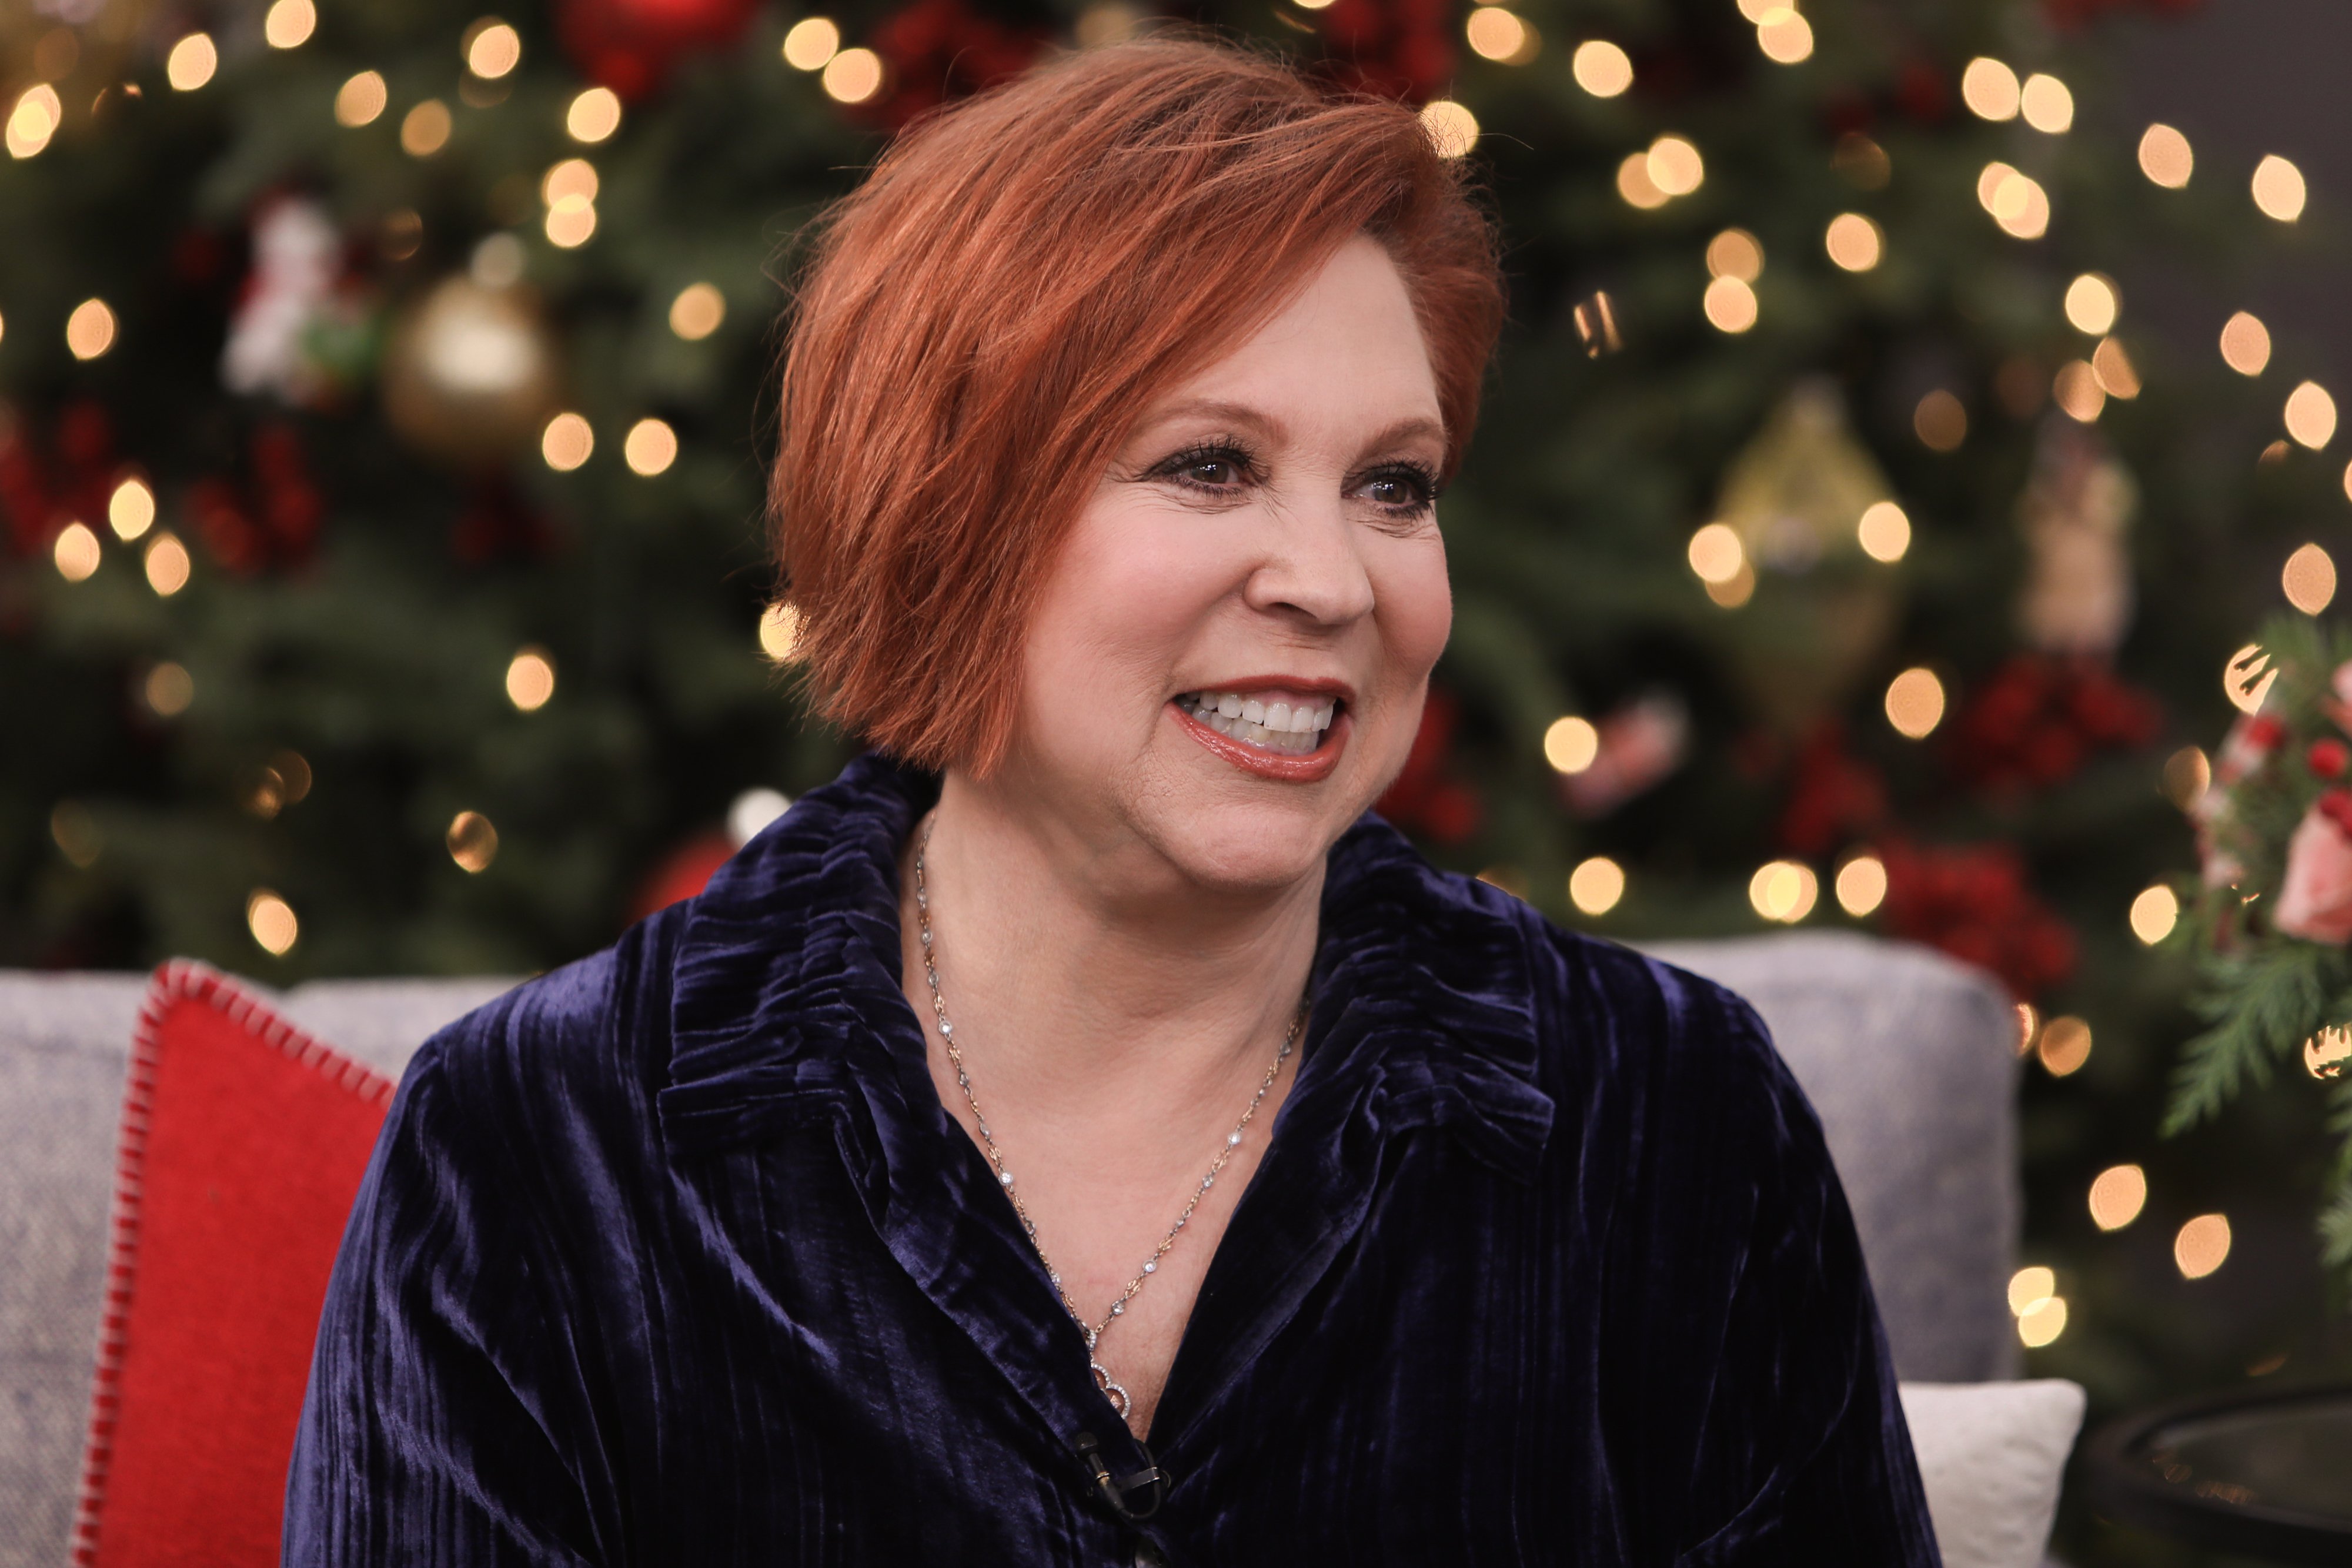 Vicki Lawrence visits Hallmark Channel's "Home & Family" at Universal Studios Hollywood on November 05, 2019 | Photo: GettyImages